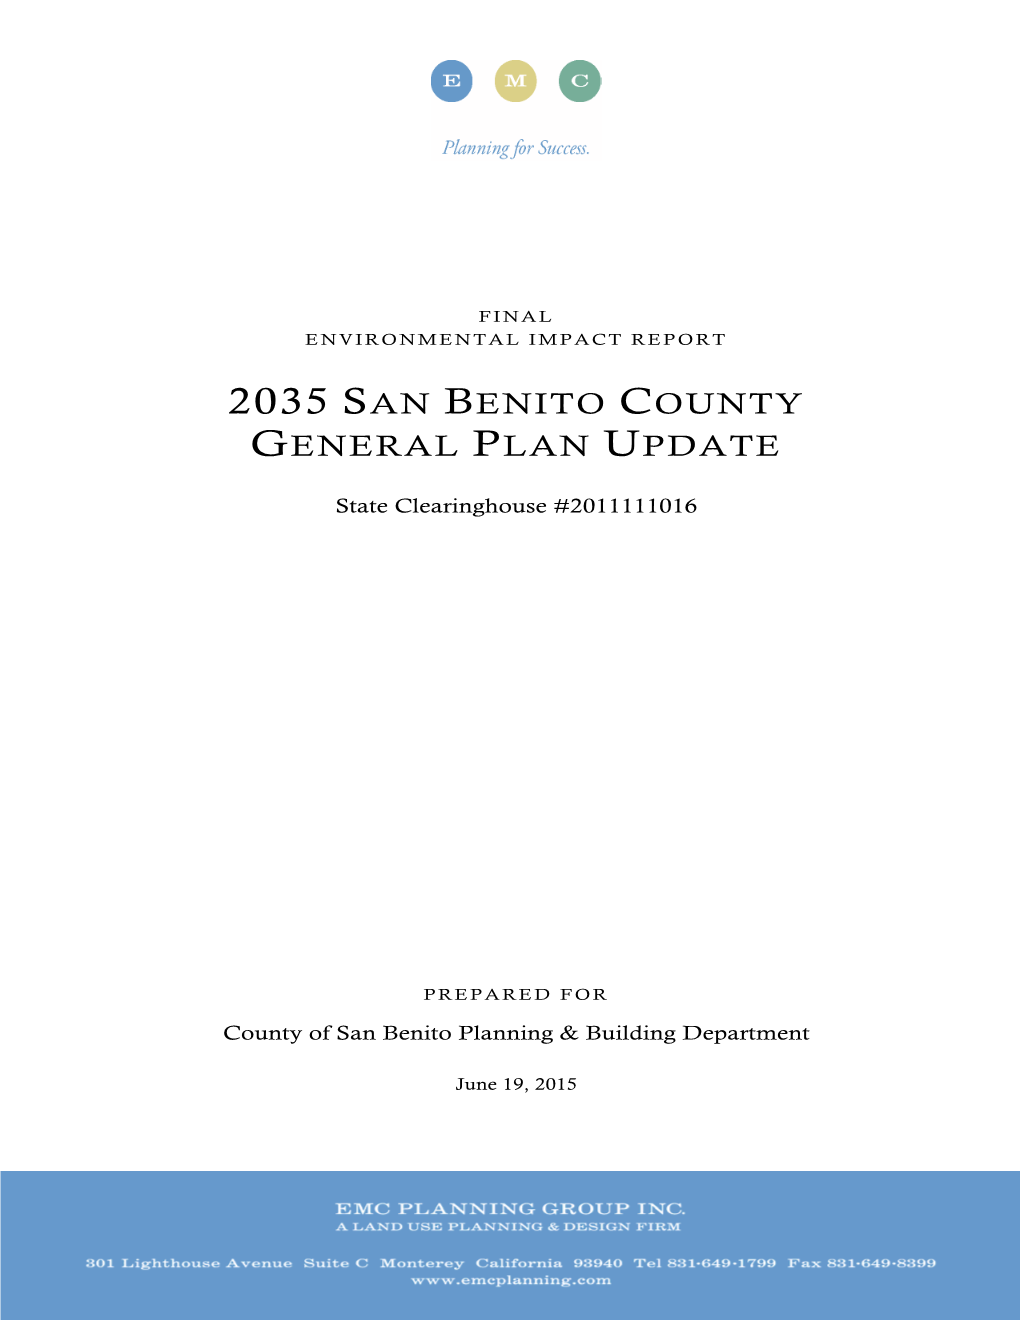 2035 San Benito County General Plan Update